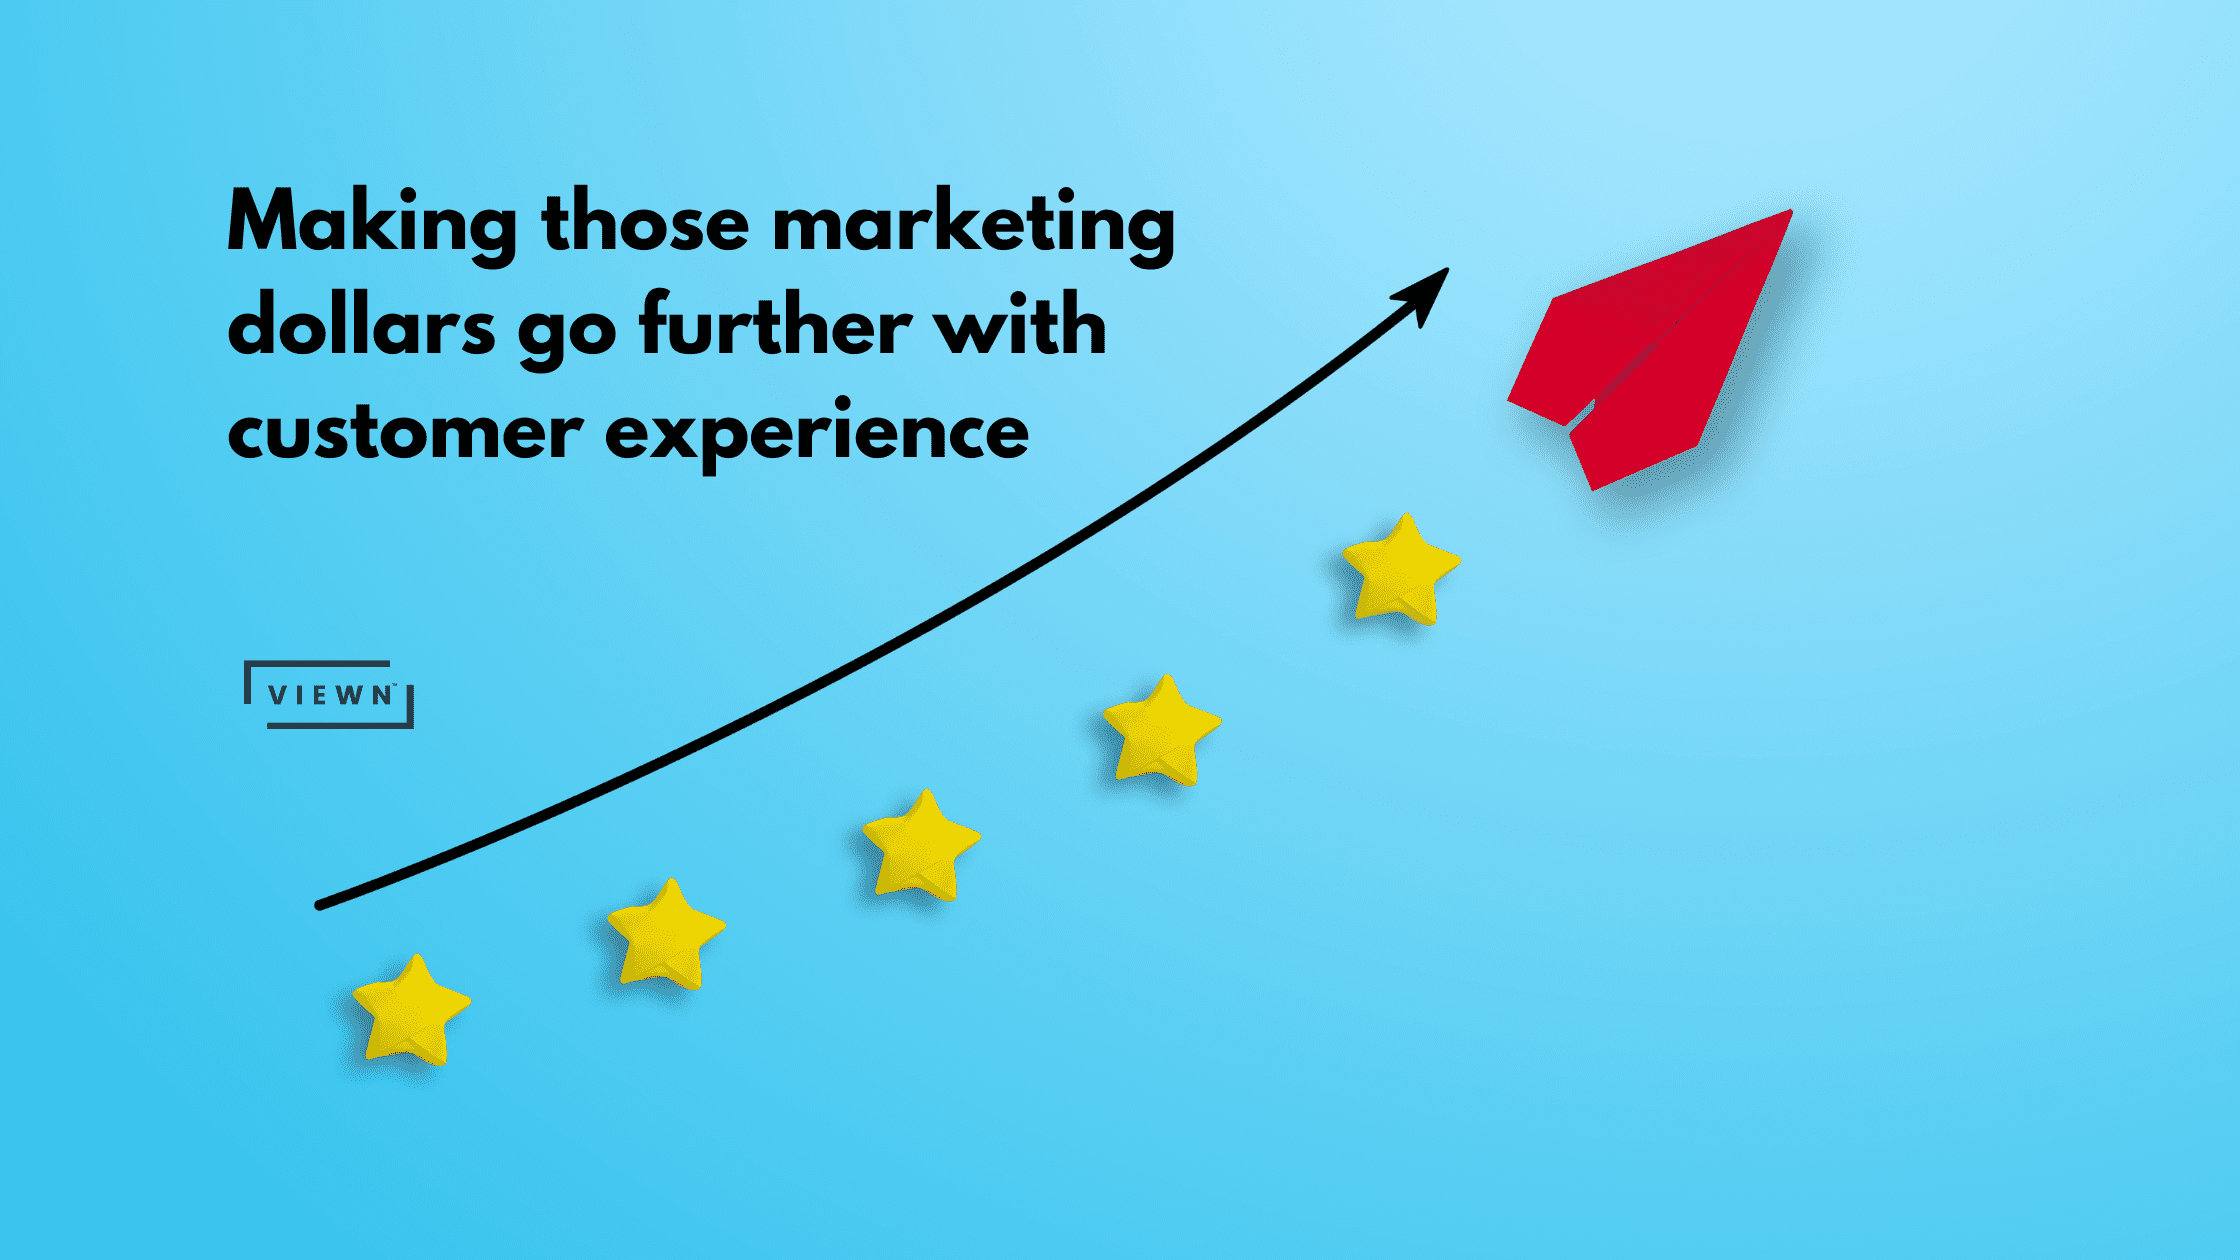 Making those marketing dollars go further with customer experience